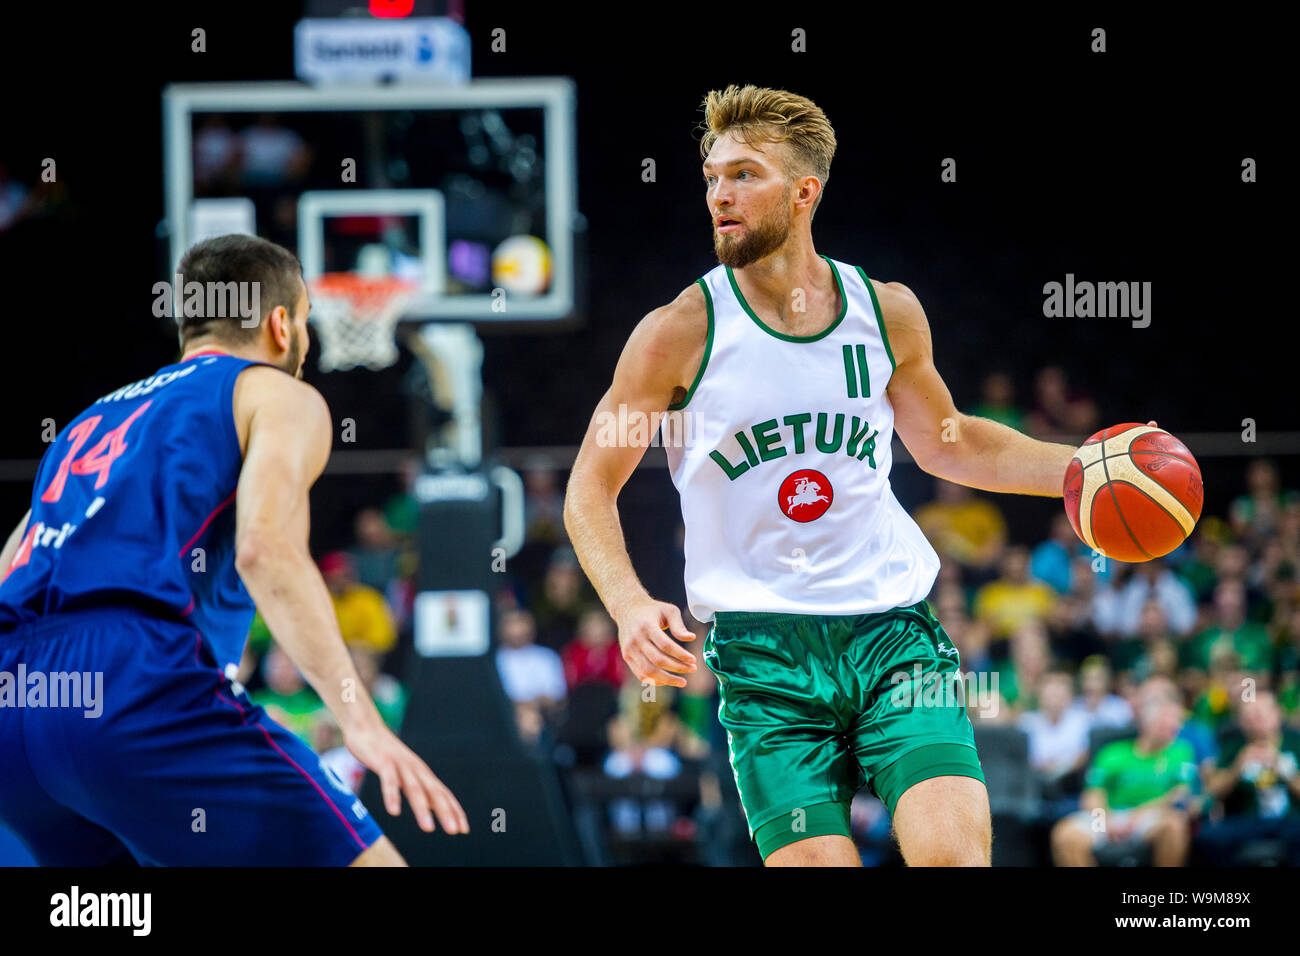 Lithuanian player Domantas Sabonis in action Stock Photo